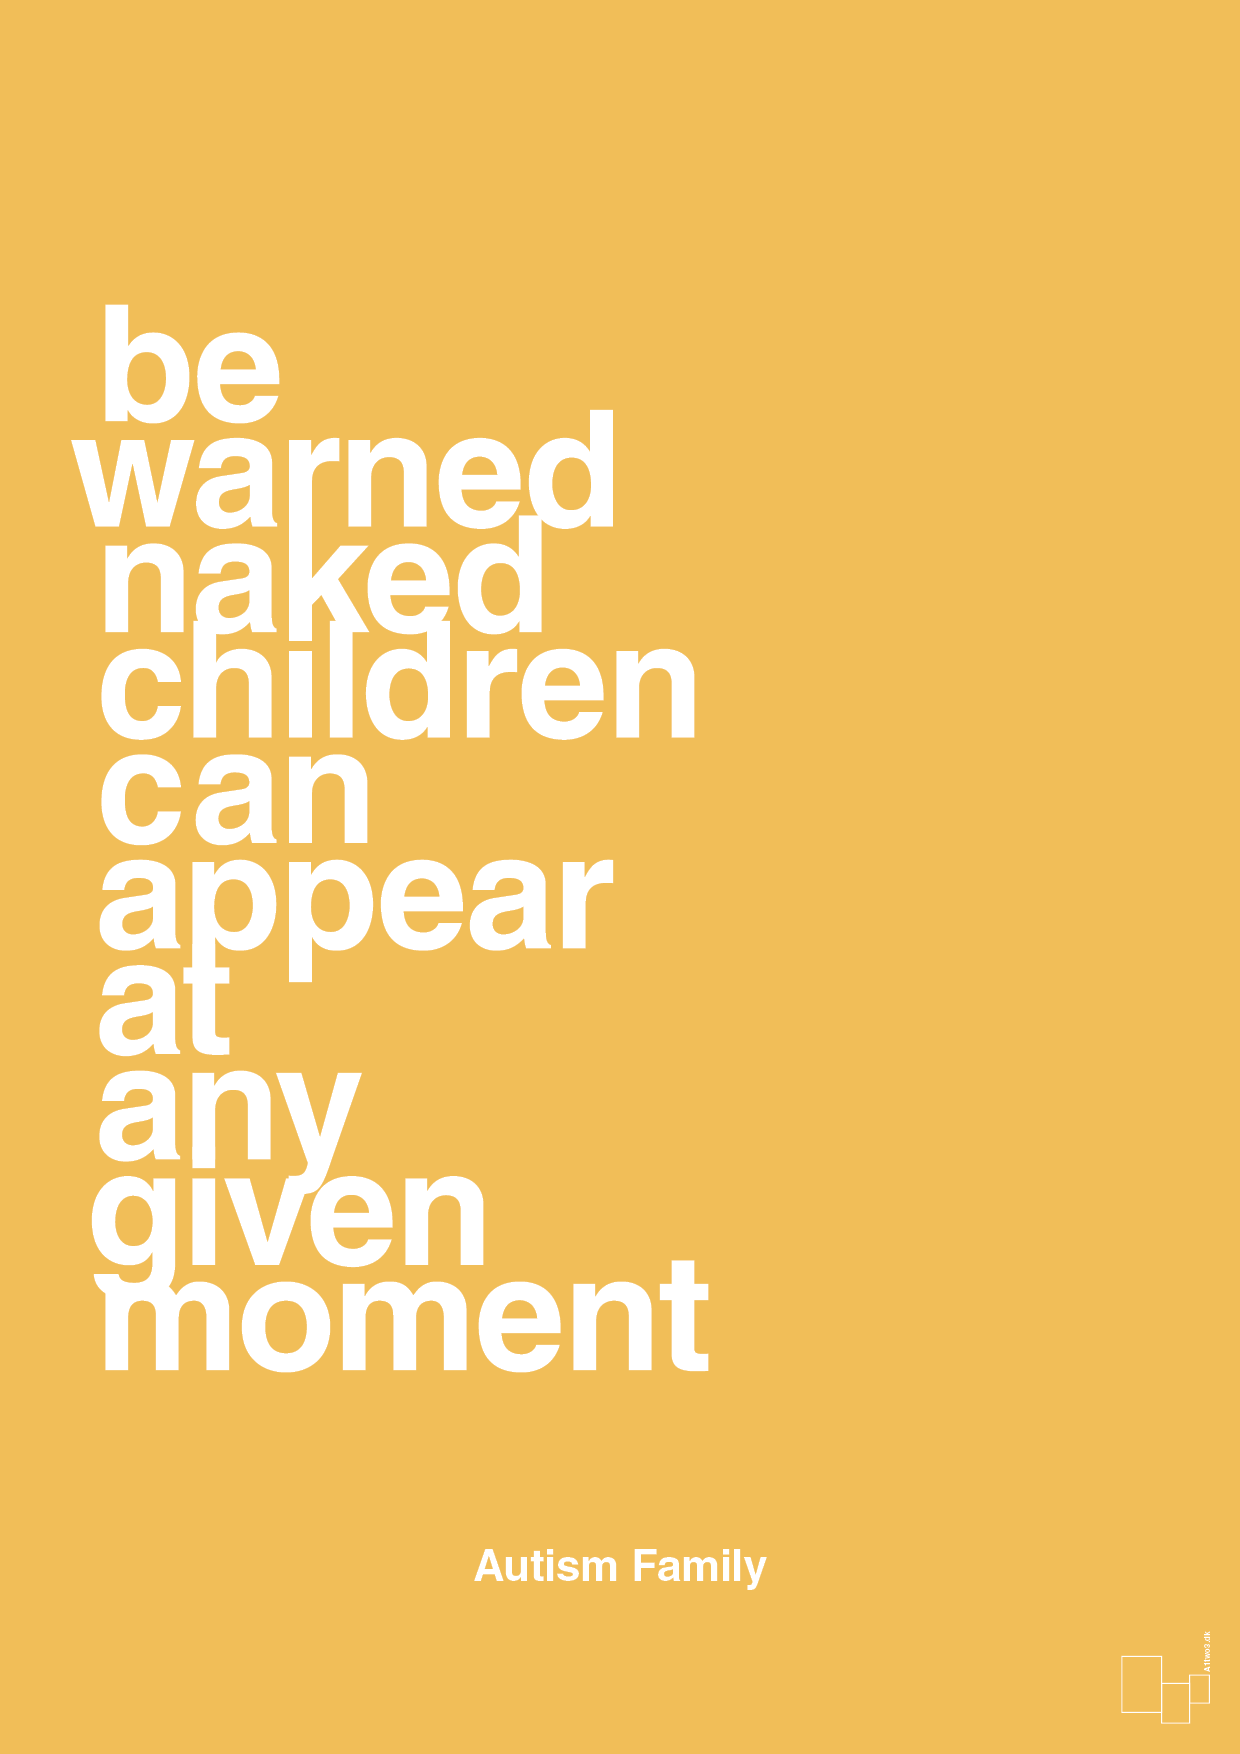 be warned naked children can appear at any given moment - Plakat med Samfund i Honeycomb